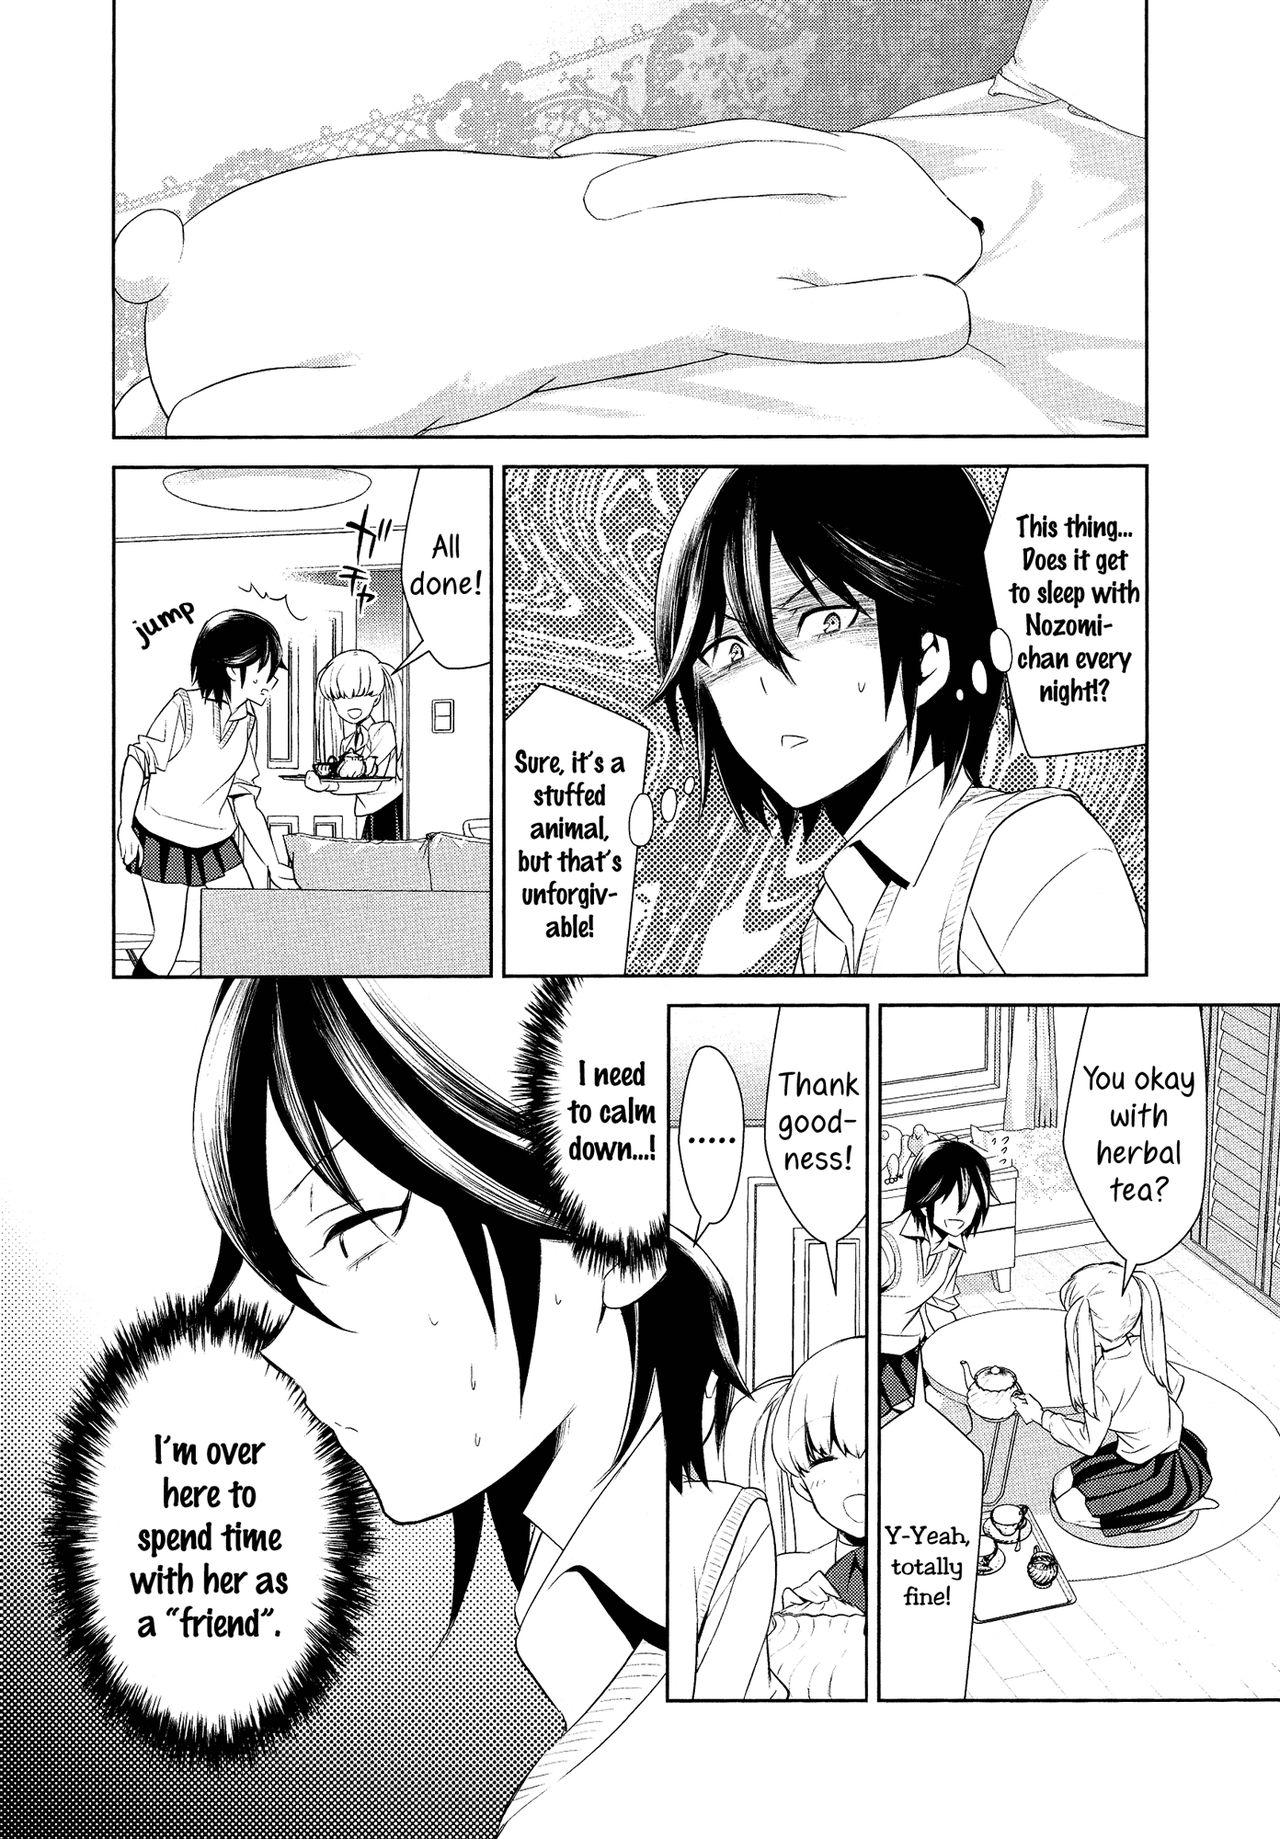 Buttplug Anata-gonomi ni Naritai no | I Want to be Your Kind of Girl Friend - Page 4